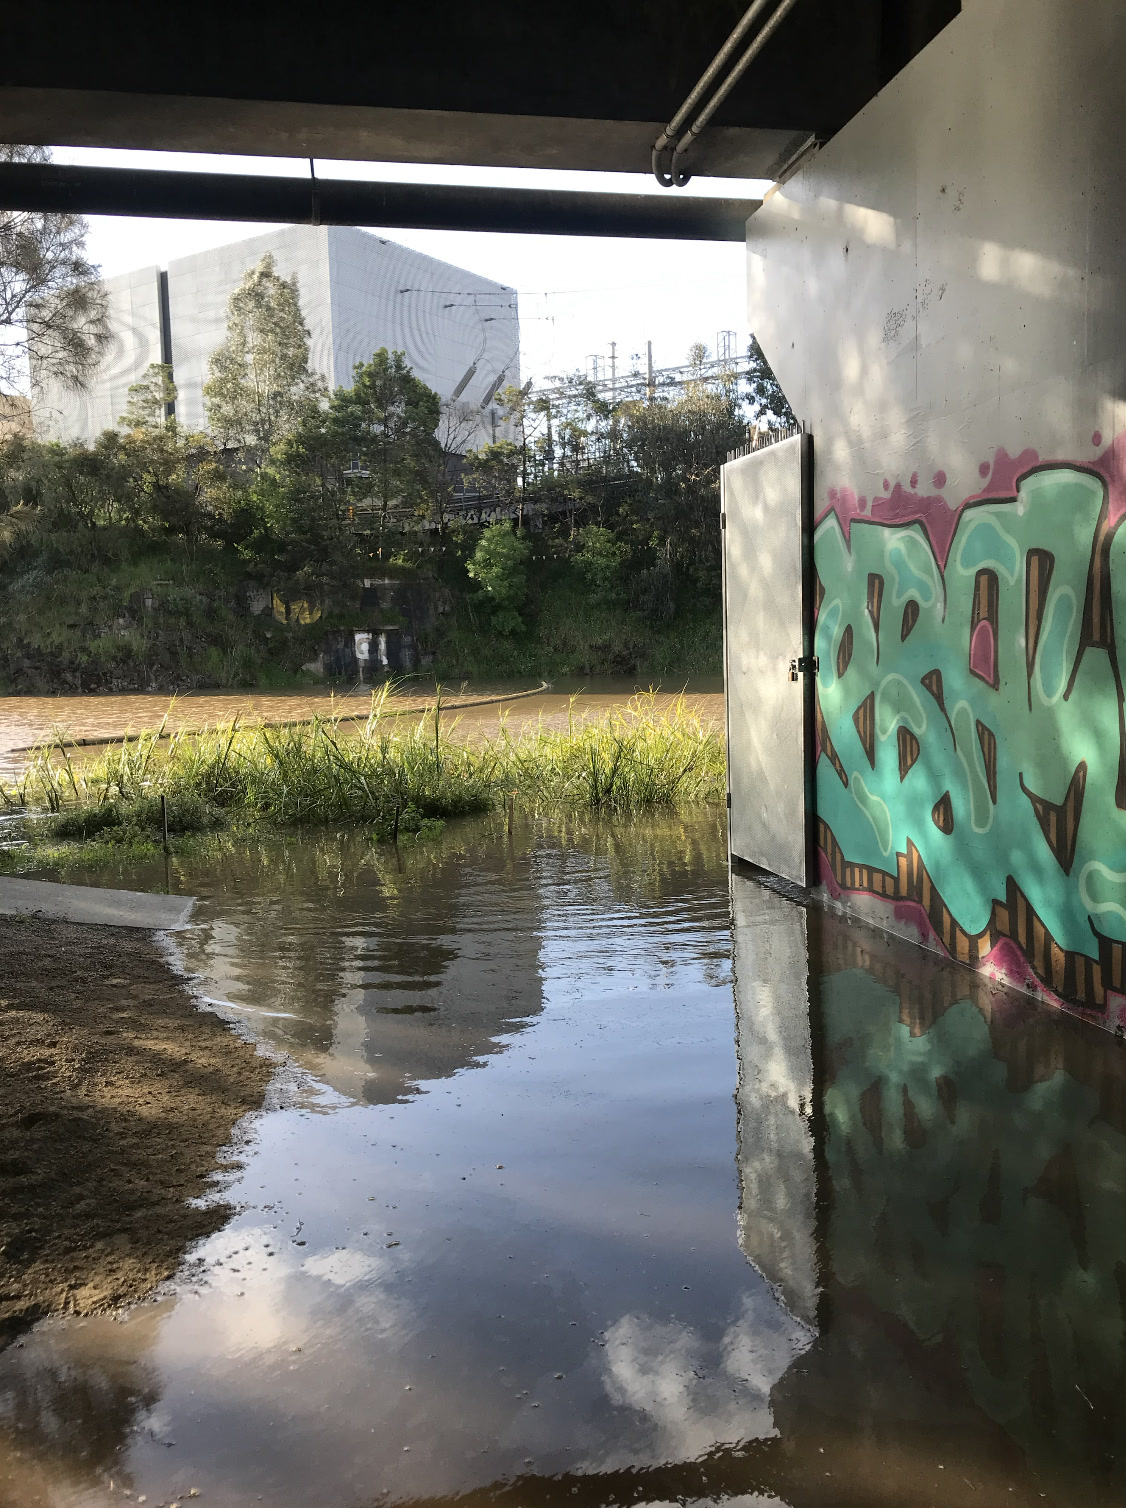 Burnley bouldering walls being flooded by the Yarra river